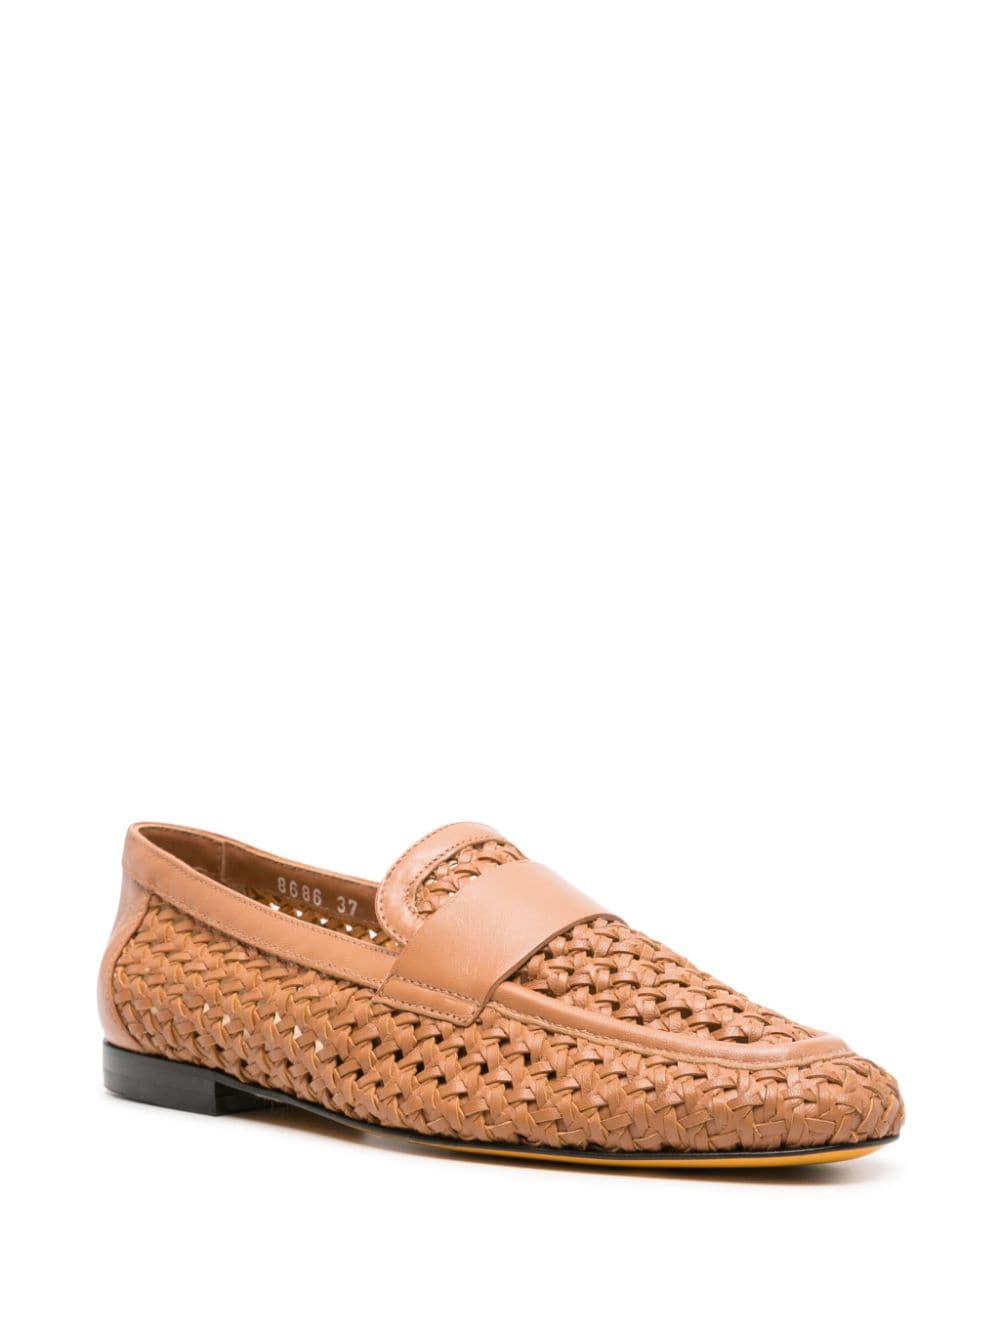 Doucal's interwoven leather loafers - Bruin